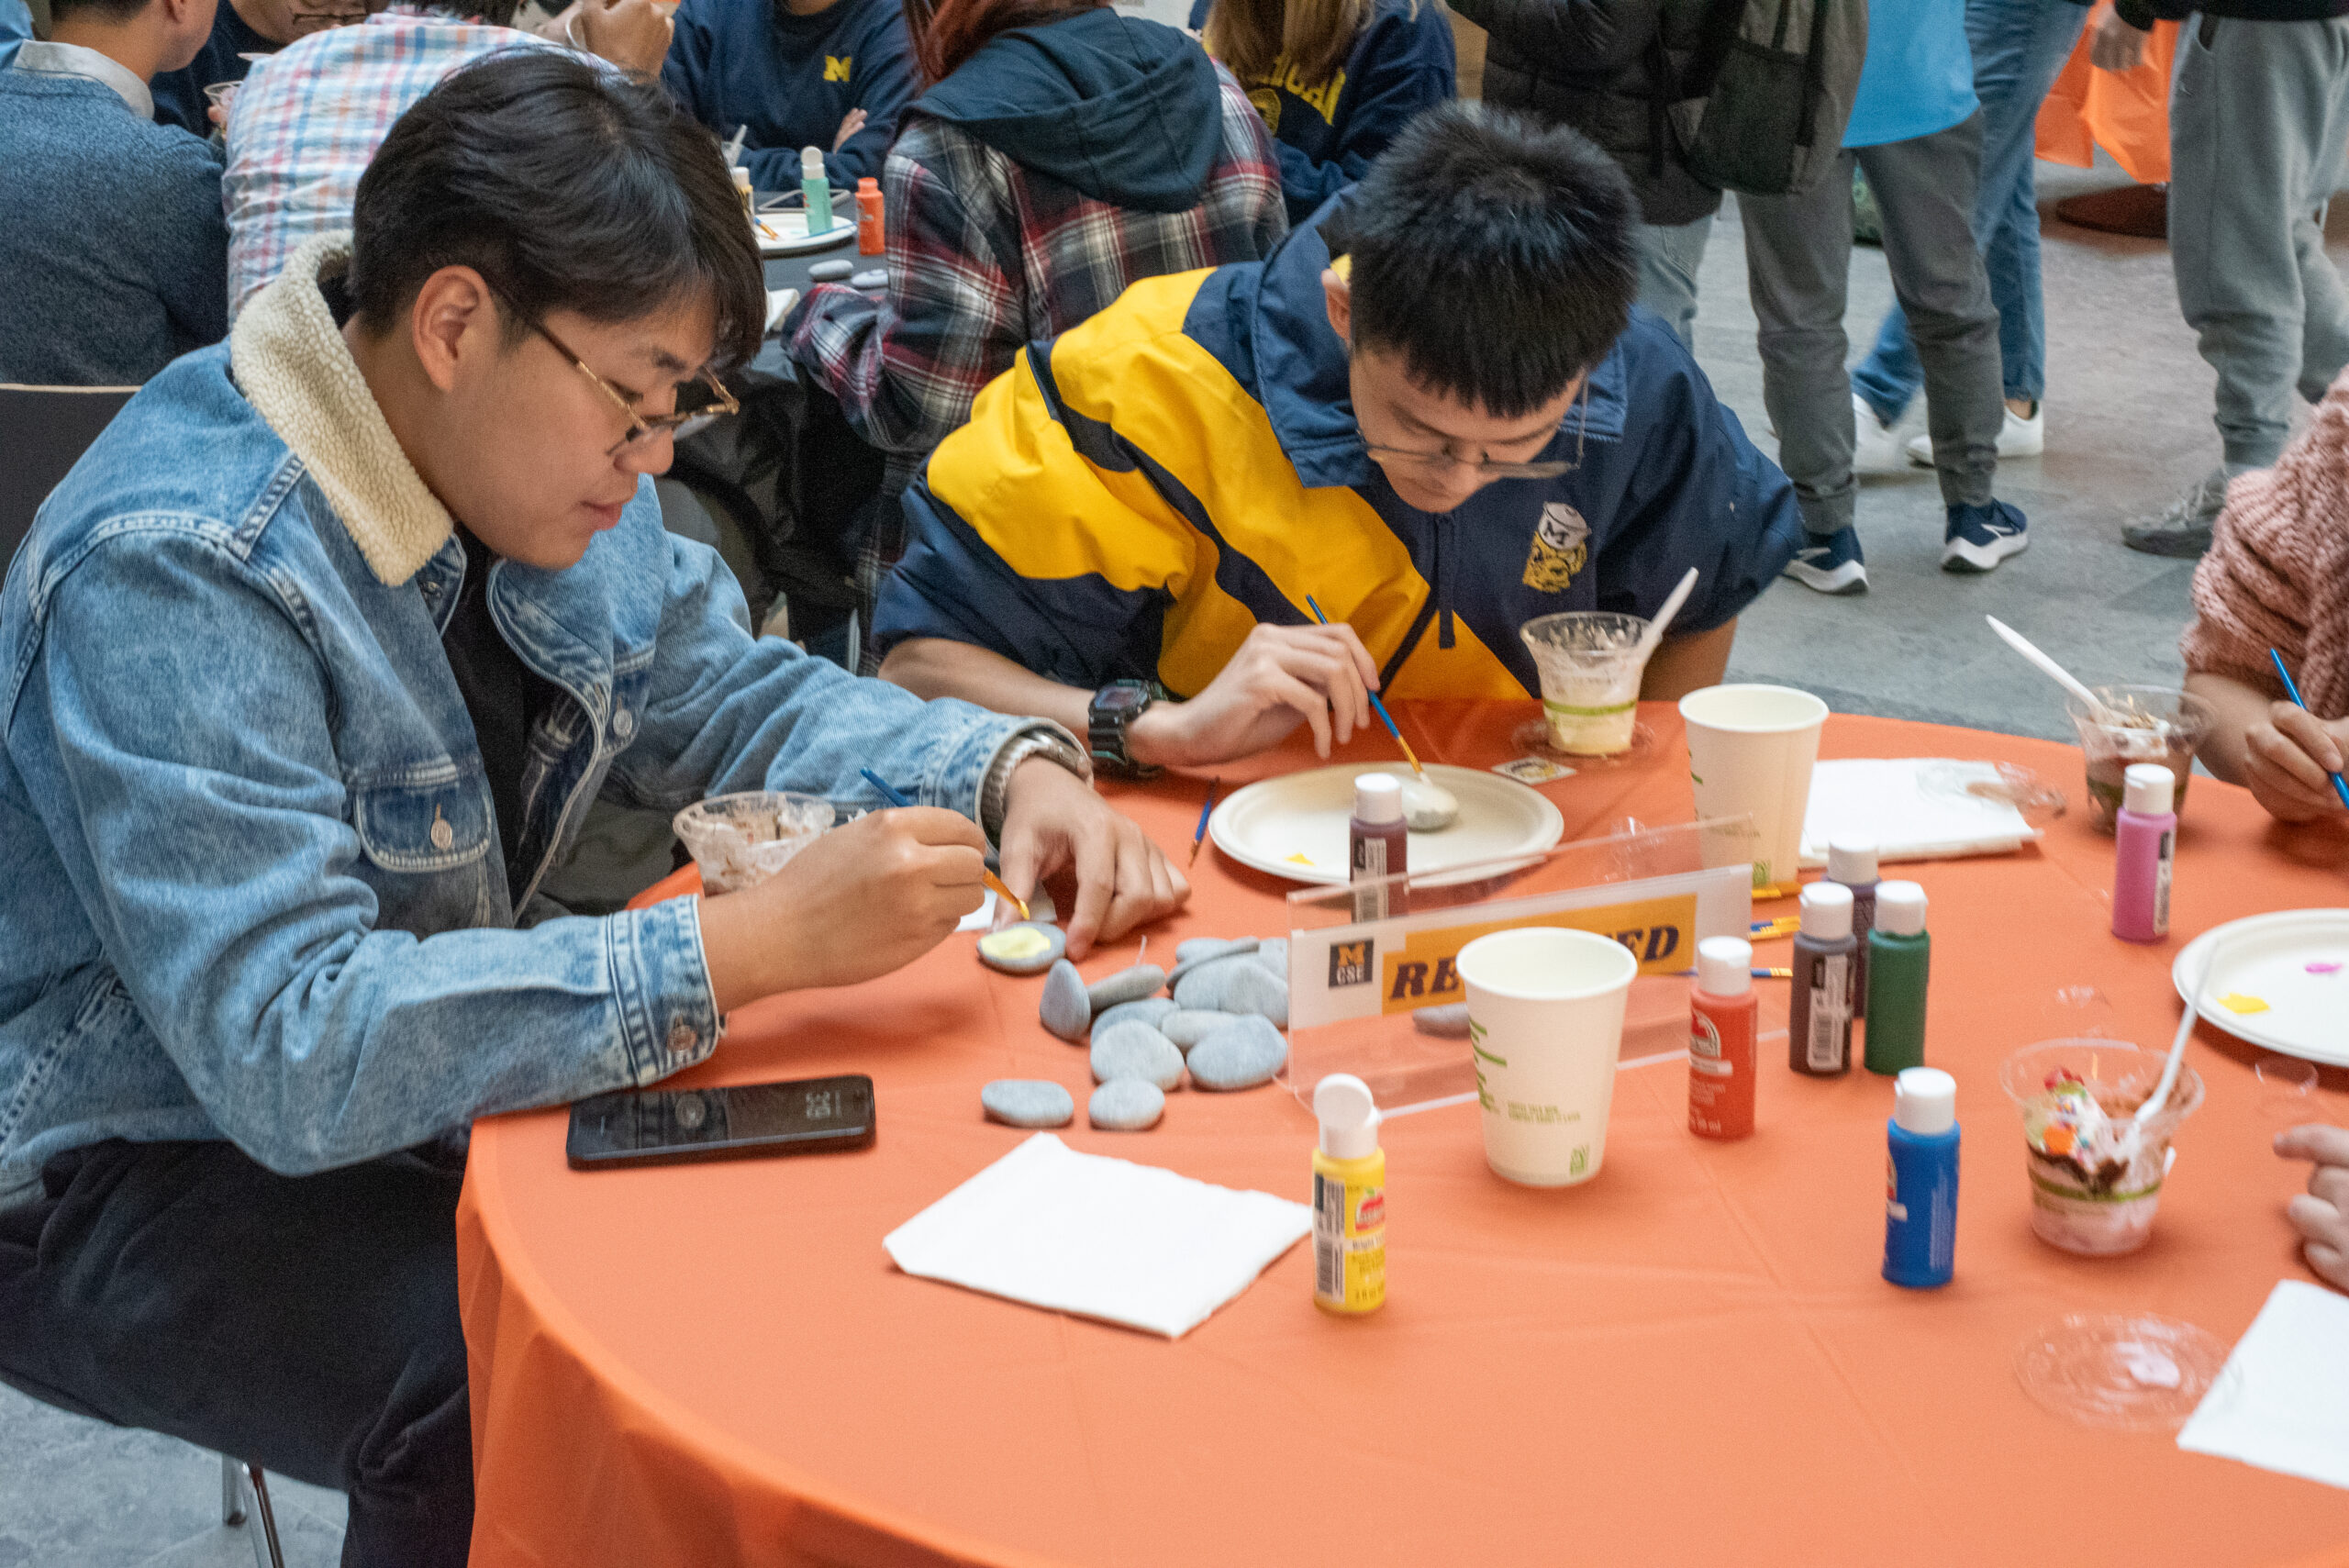 two students painting palm-sized rocks at a table with an orange table cloth